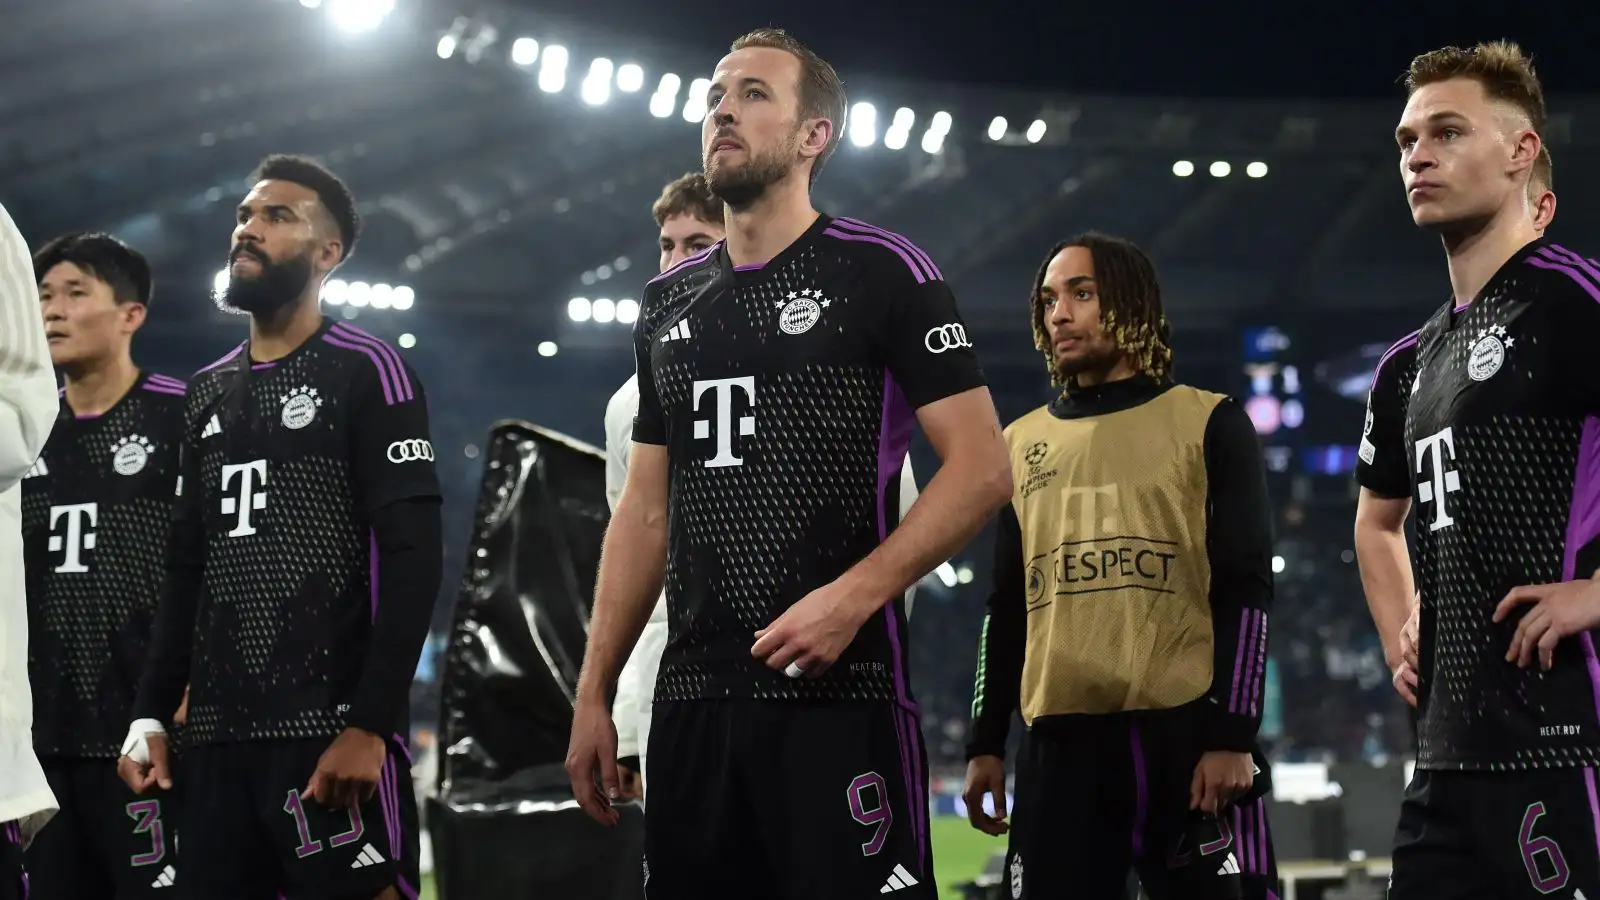 Harry Kane and also his Bayern Munich junior-mates exquisiteness dejected after a defeat.